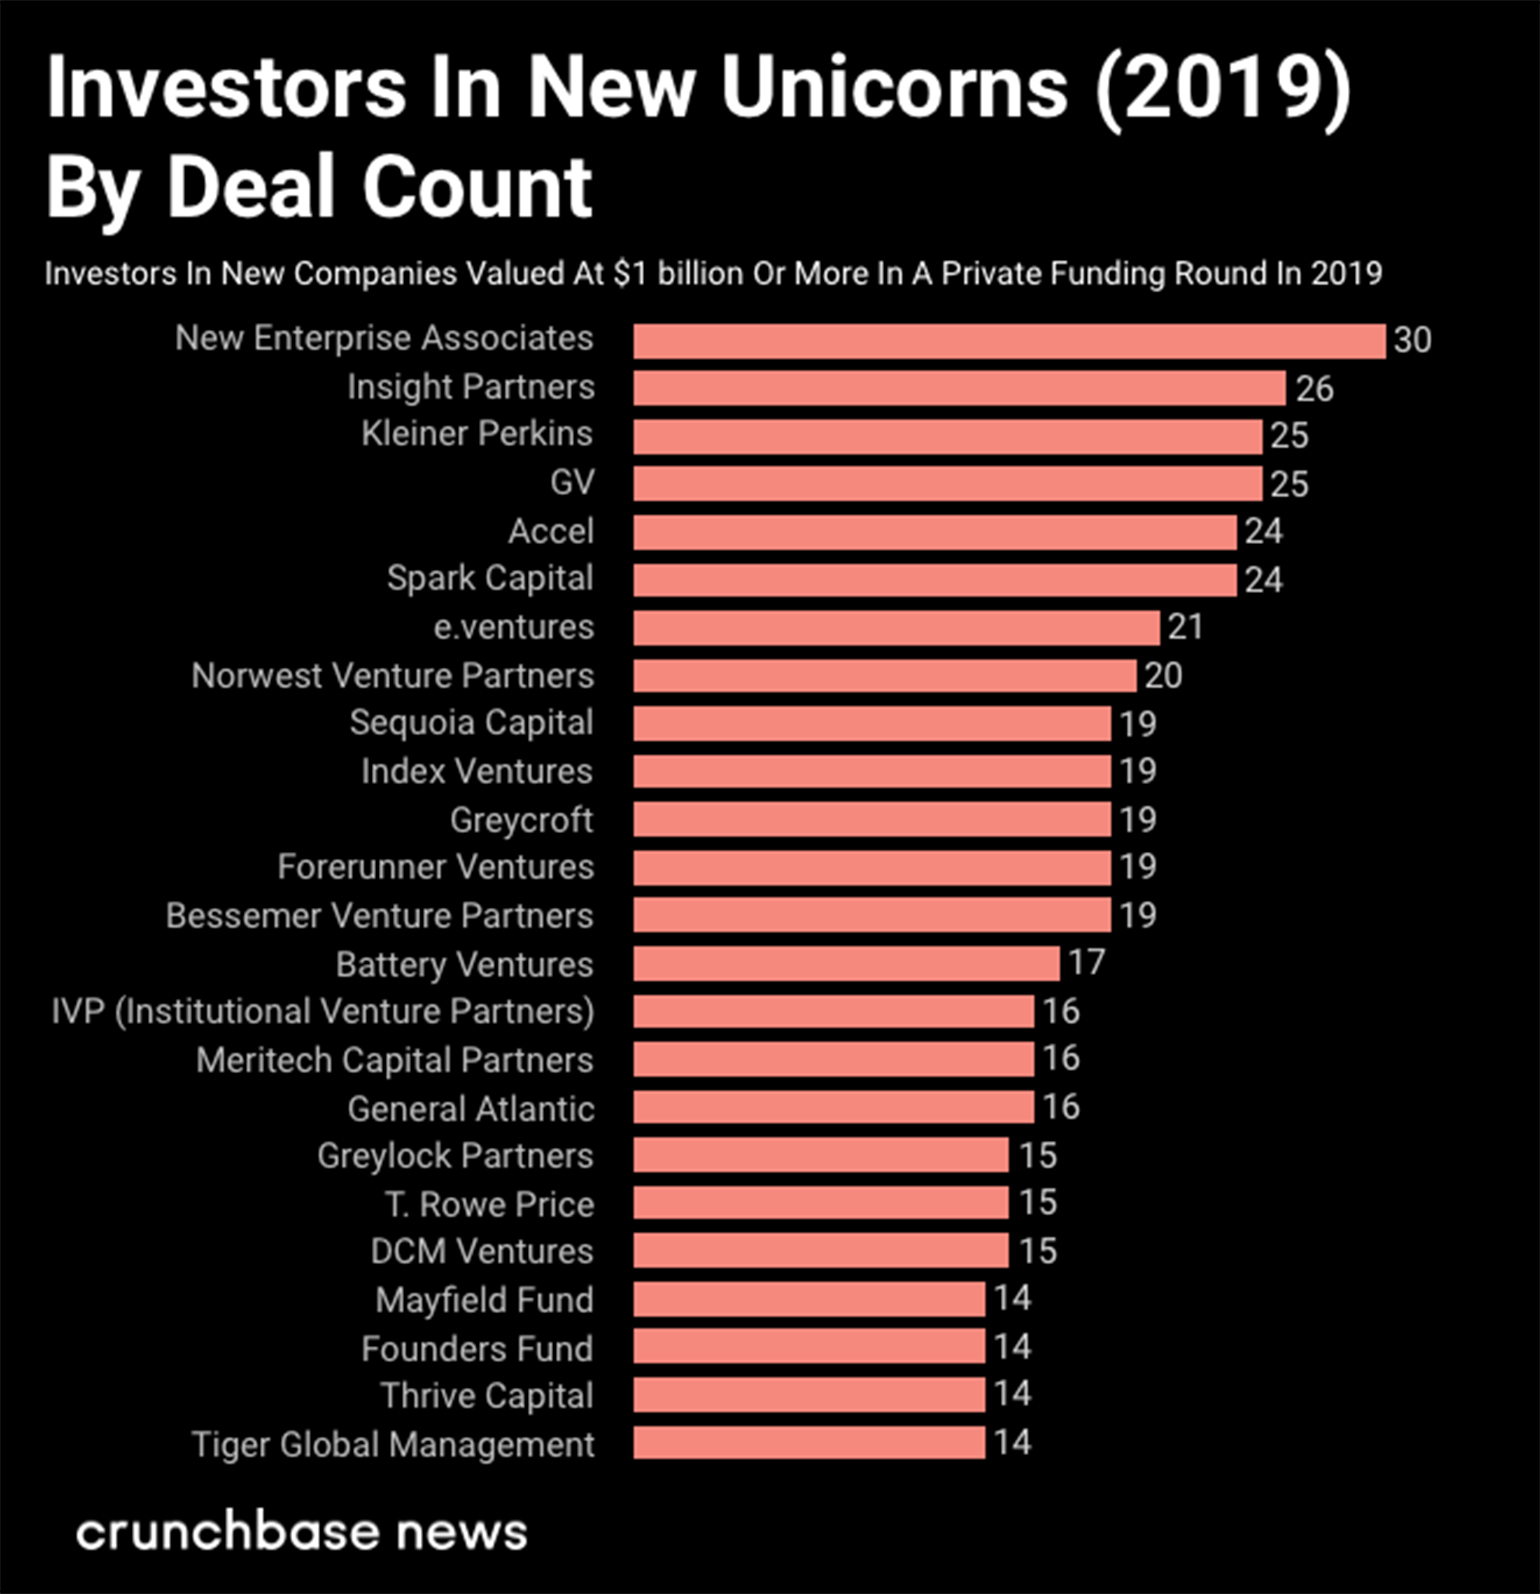 The Growth Of New Unicorns In 2019 Is Higher Than Previous Years-Body Image 20